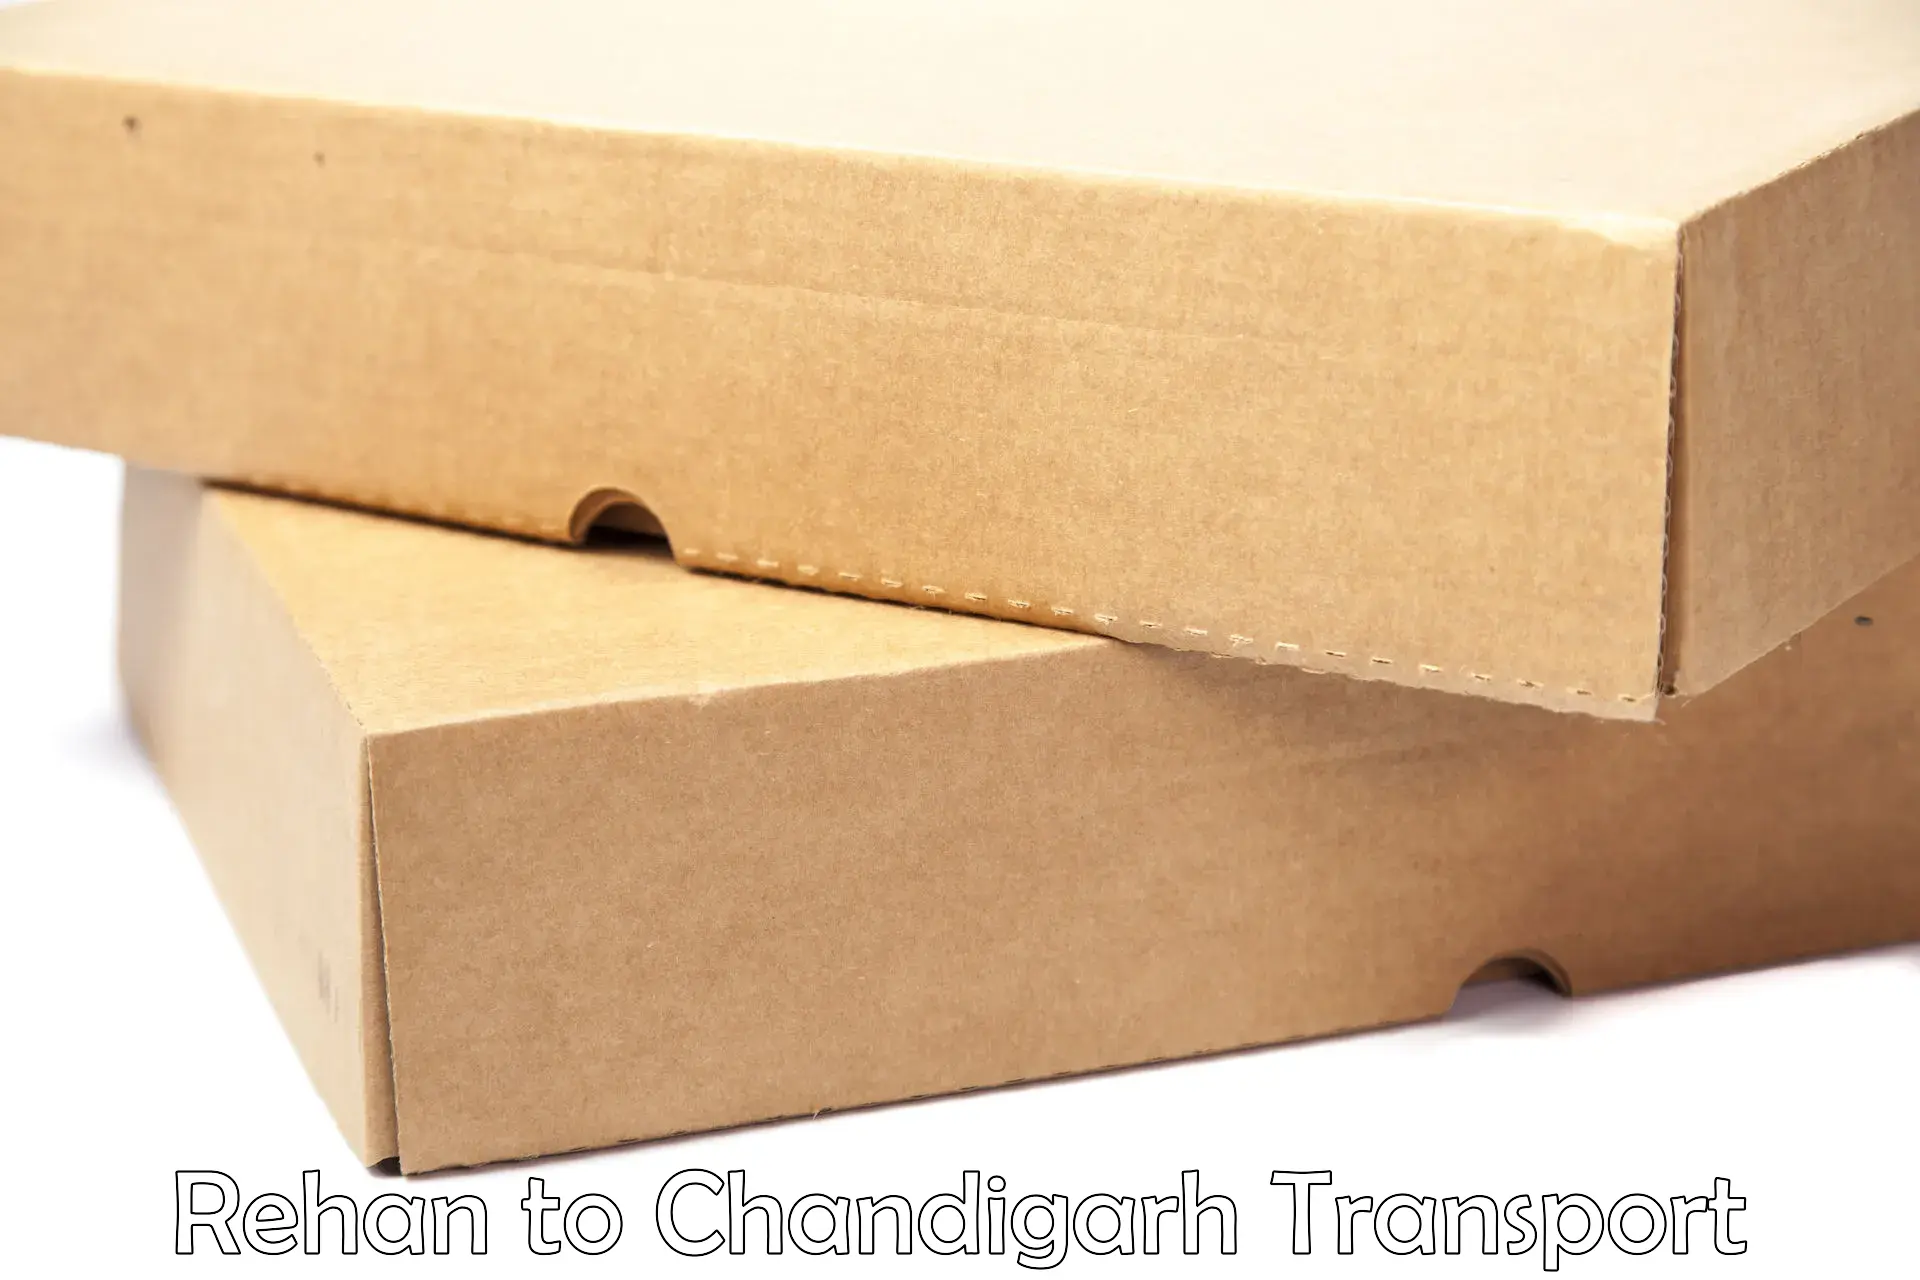 Vehicle transport services Rehan to Chandigarh